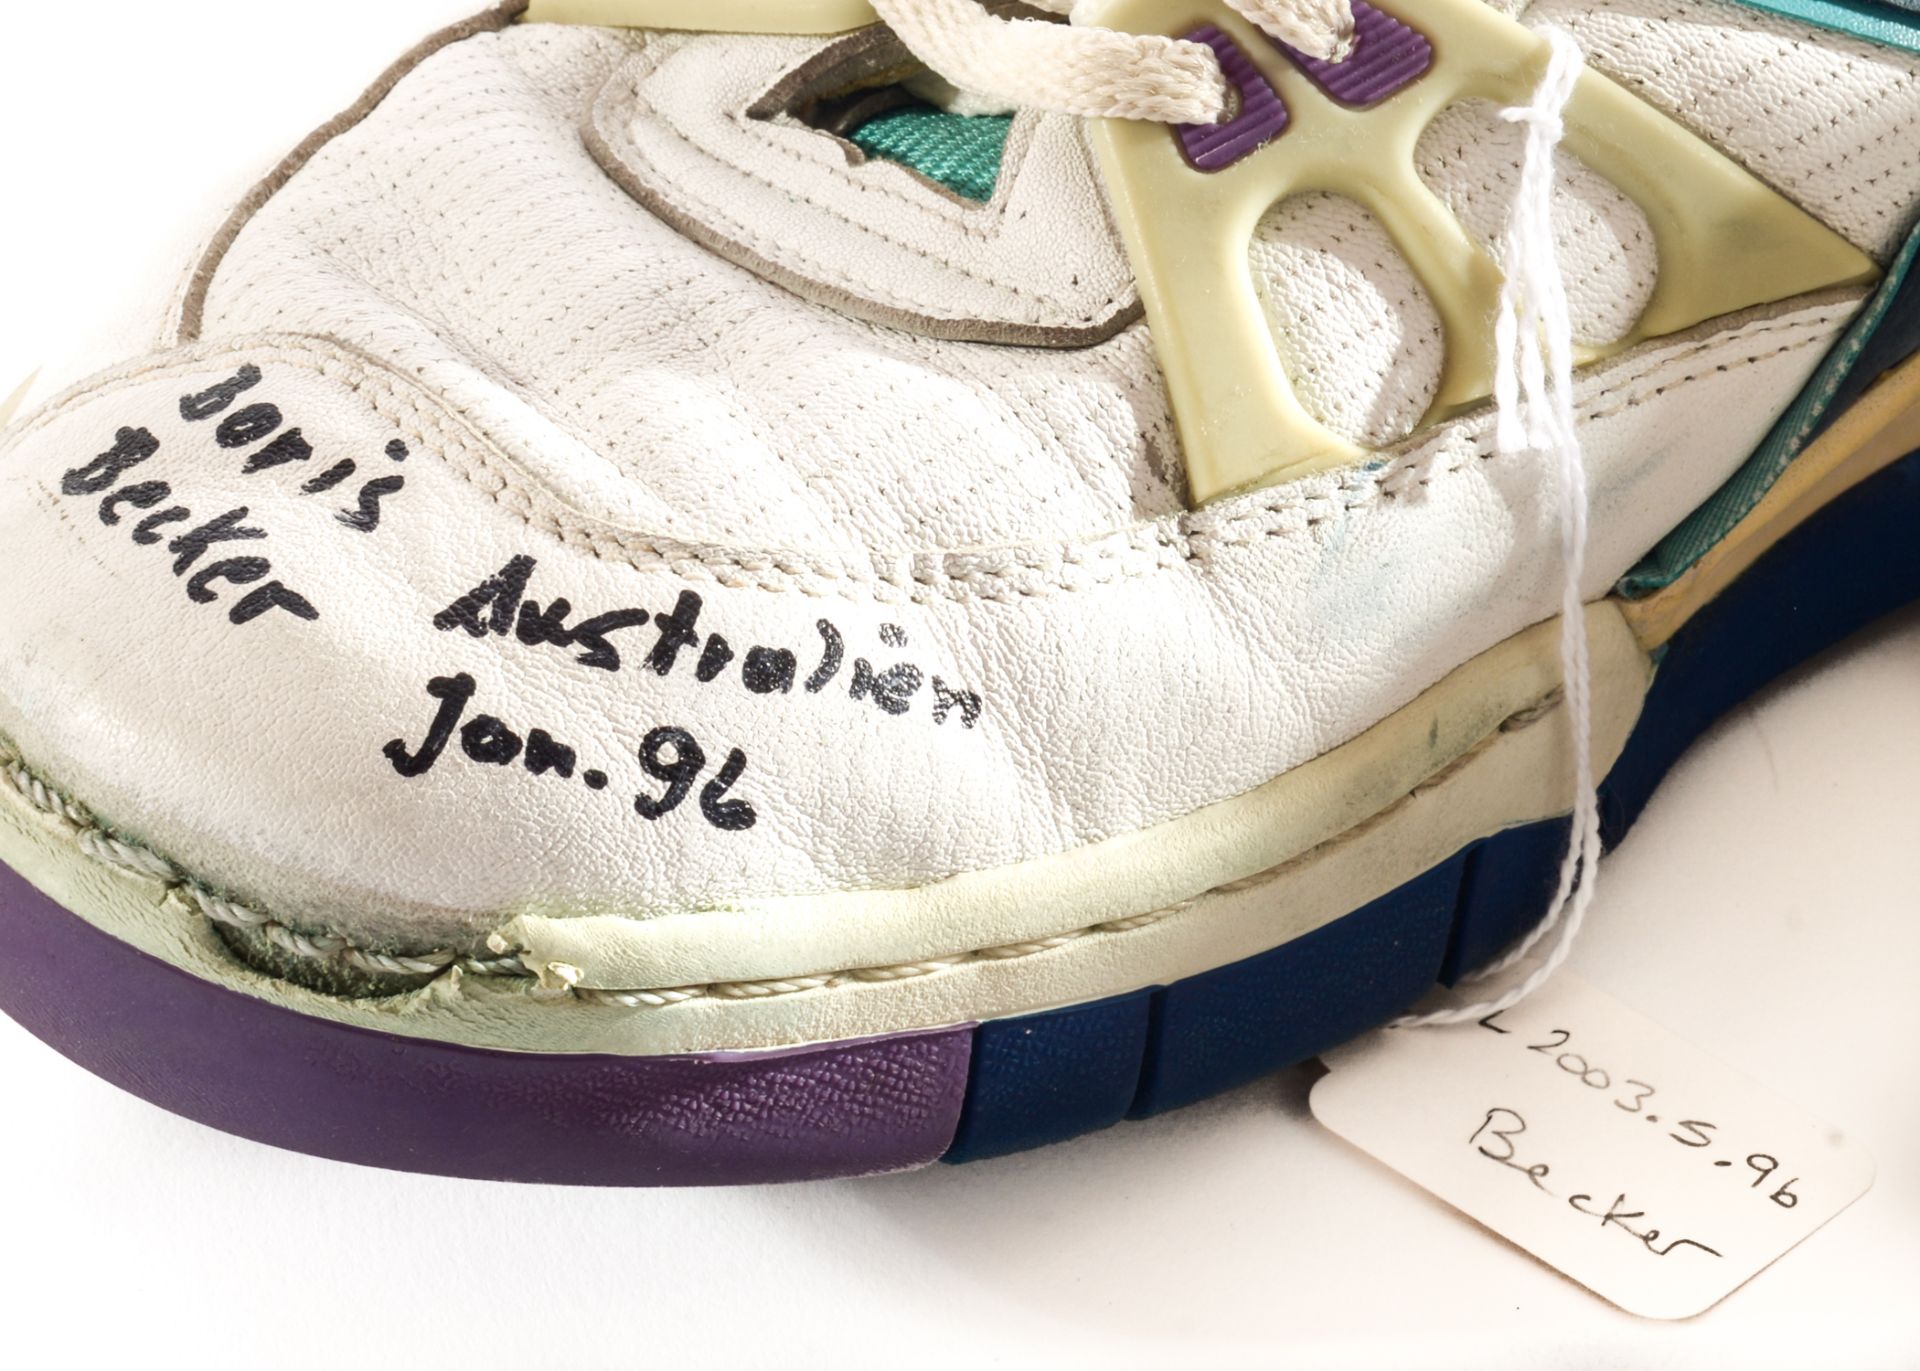 A Pair of DIADORA Tennis Shoes bearing Boris Becker's Signature, formerly exhibited at the Tennis - Image 3 of 3